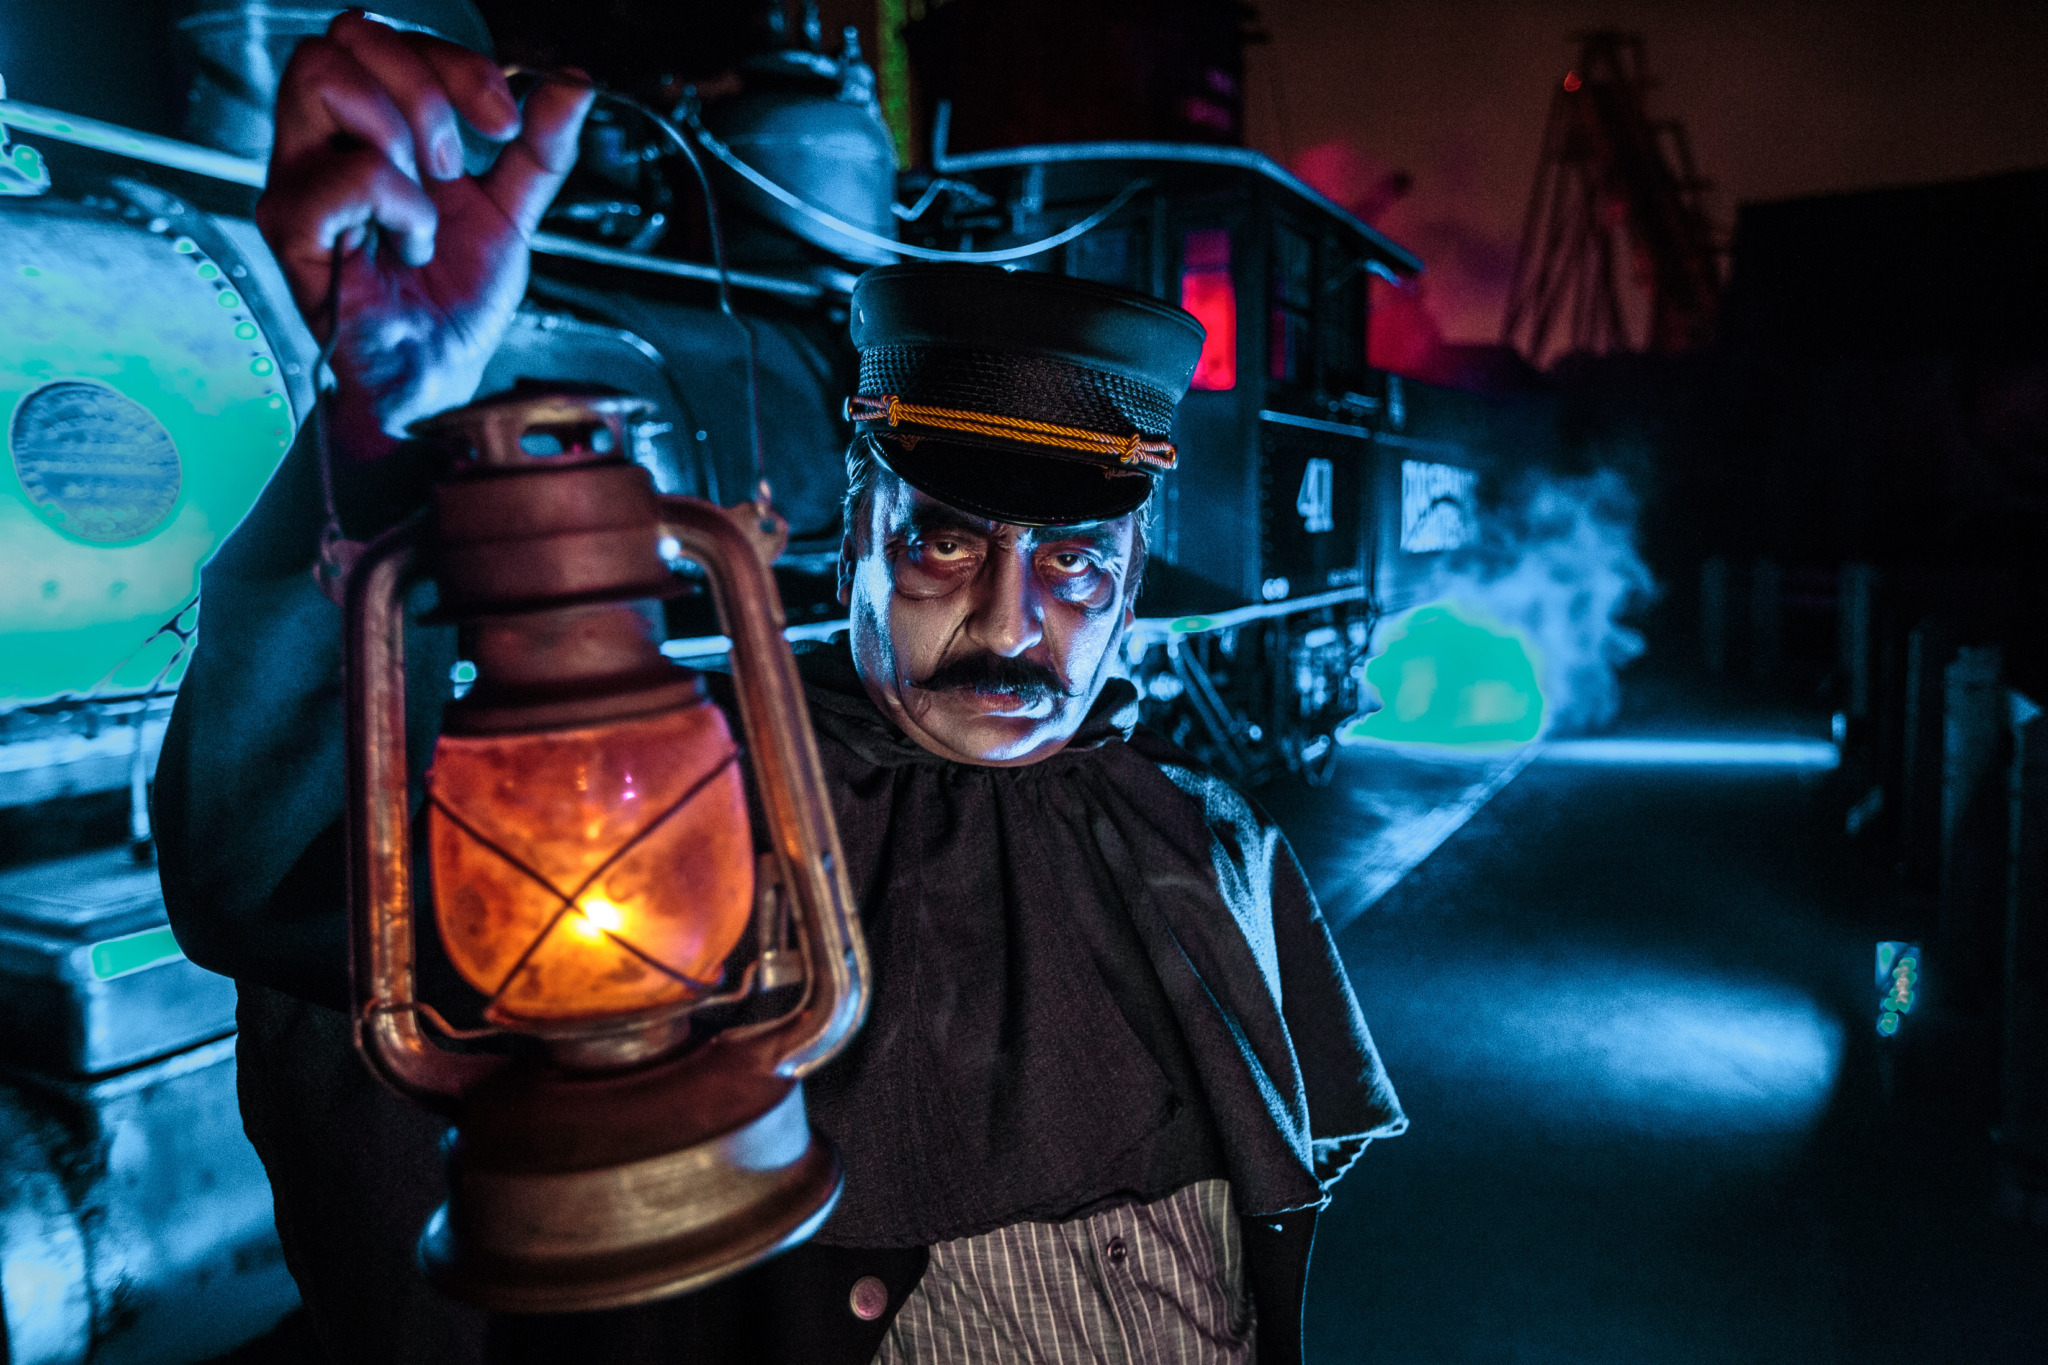 The Conductor at Knott's Scary Farm